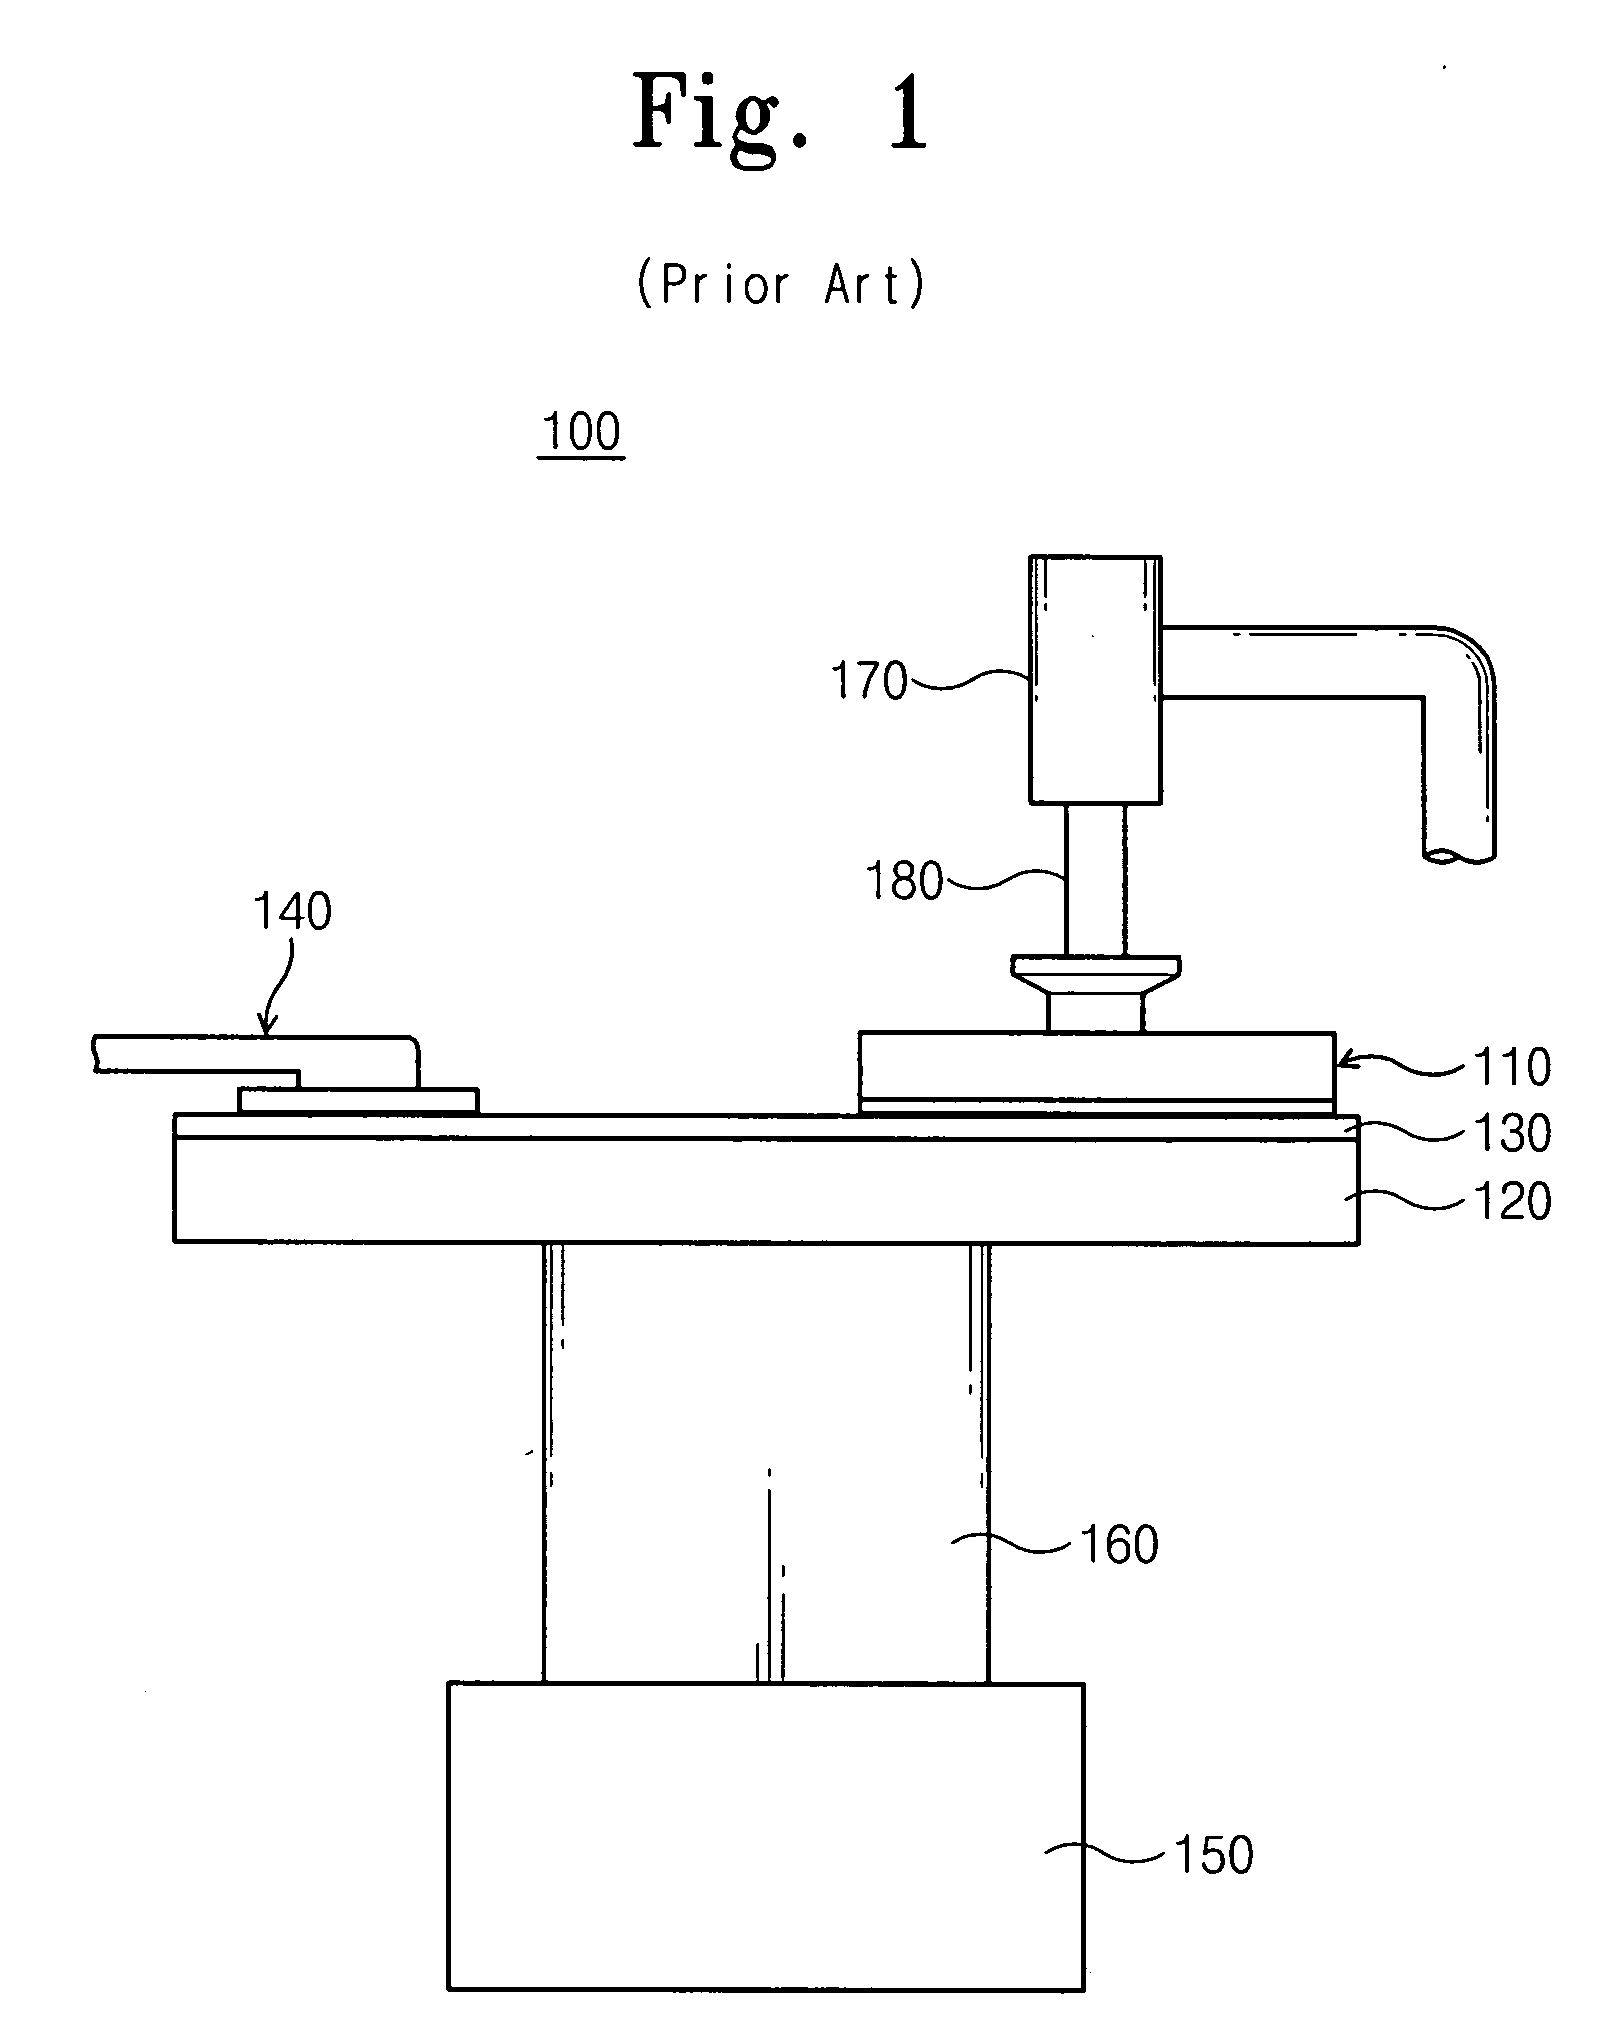 Chemical mechanical polishing apparatus and methods using a polishing surface with non-uniform rigidity